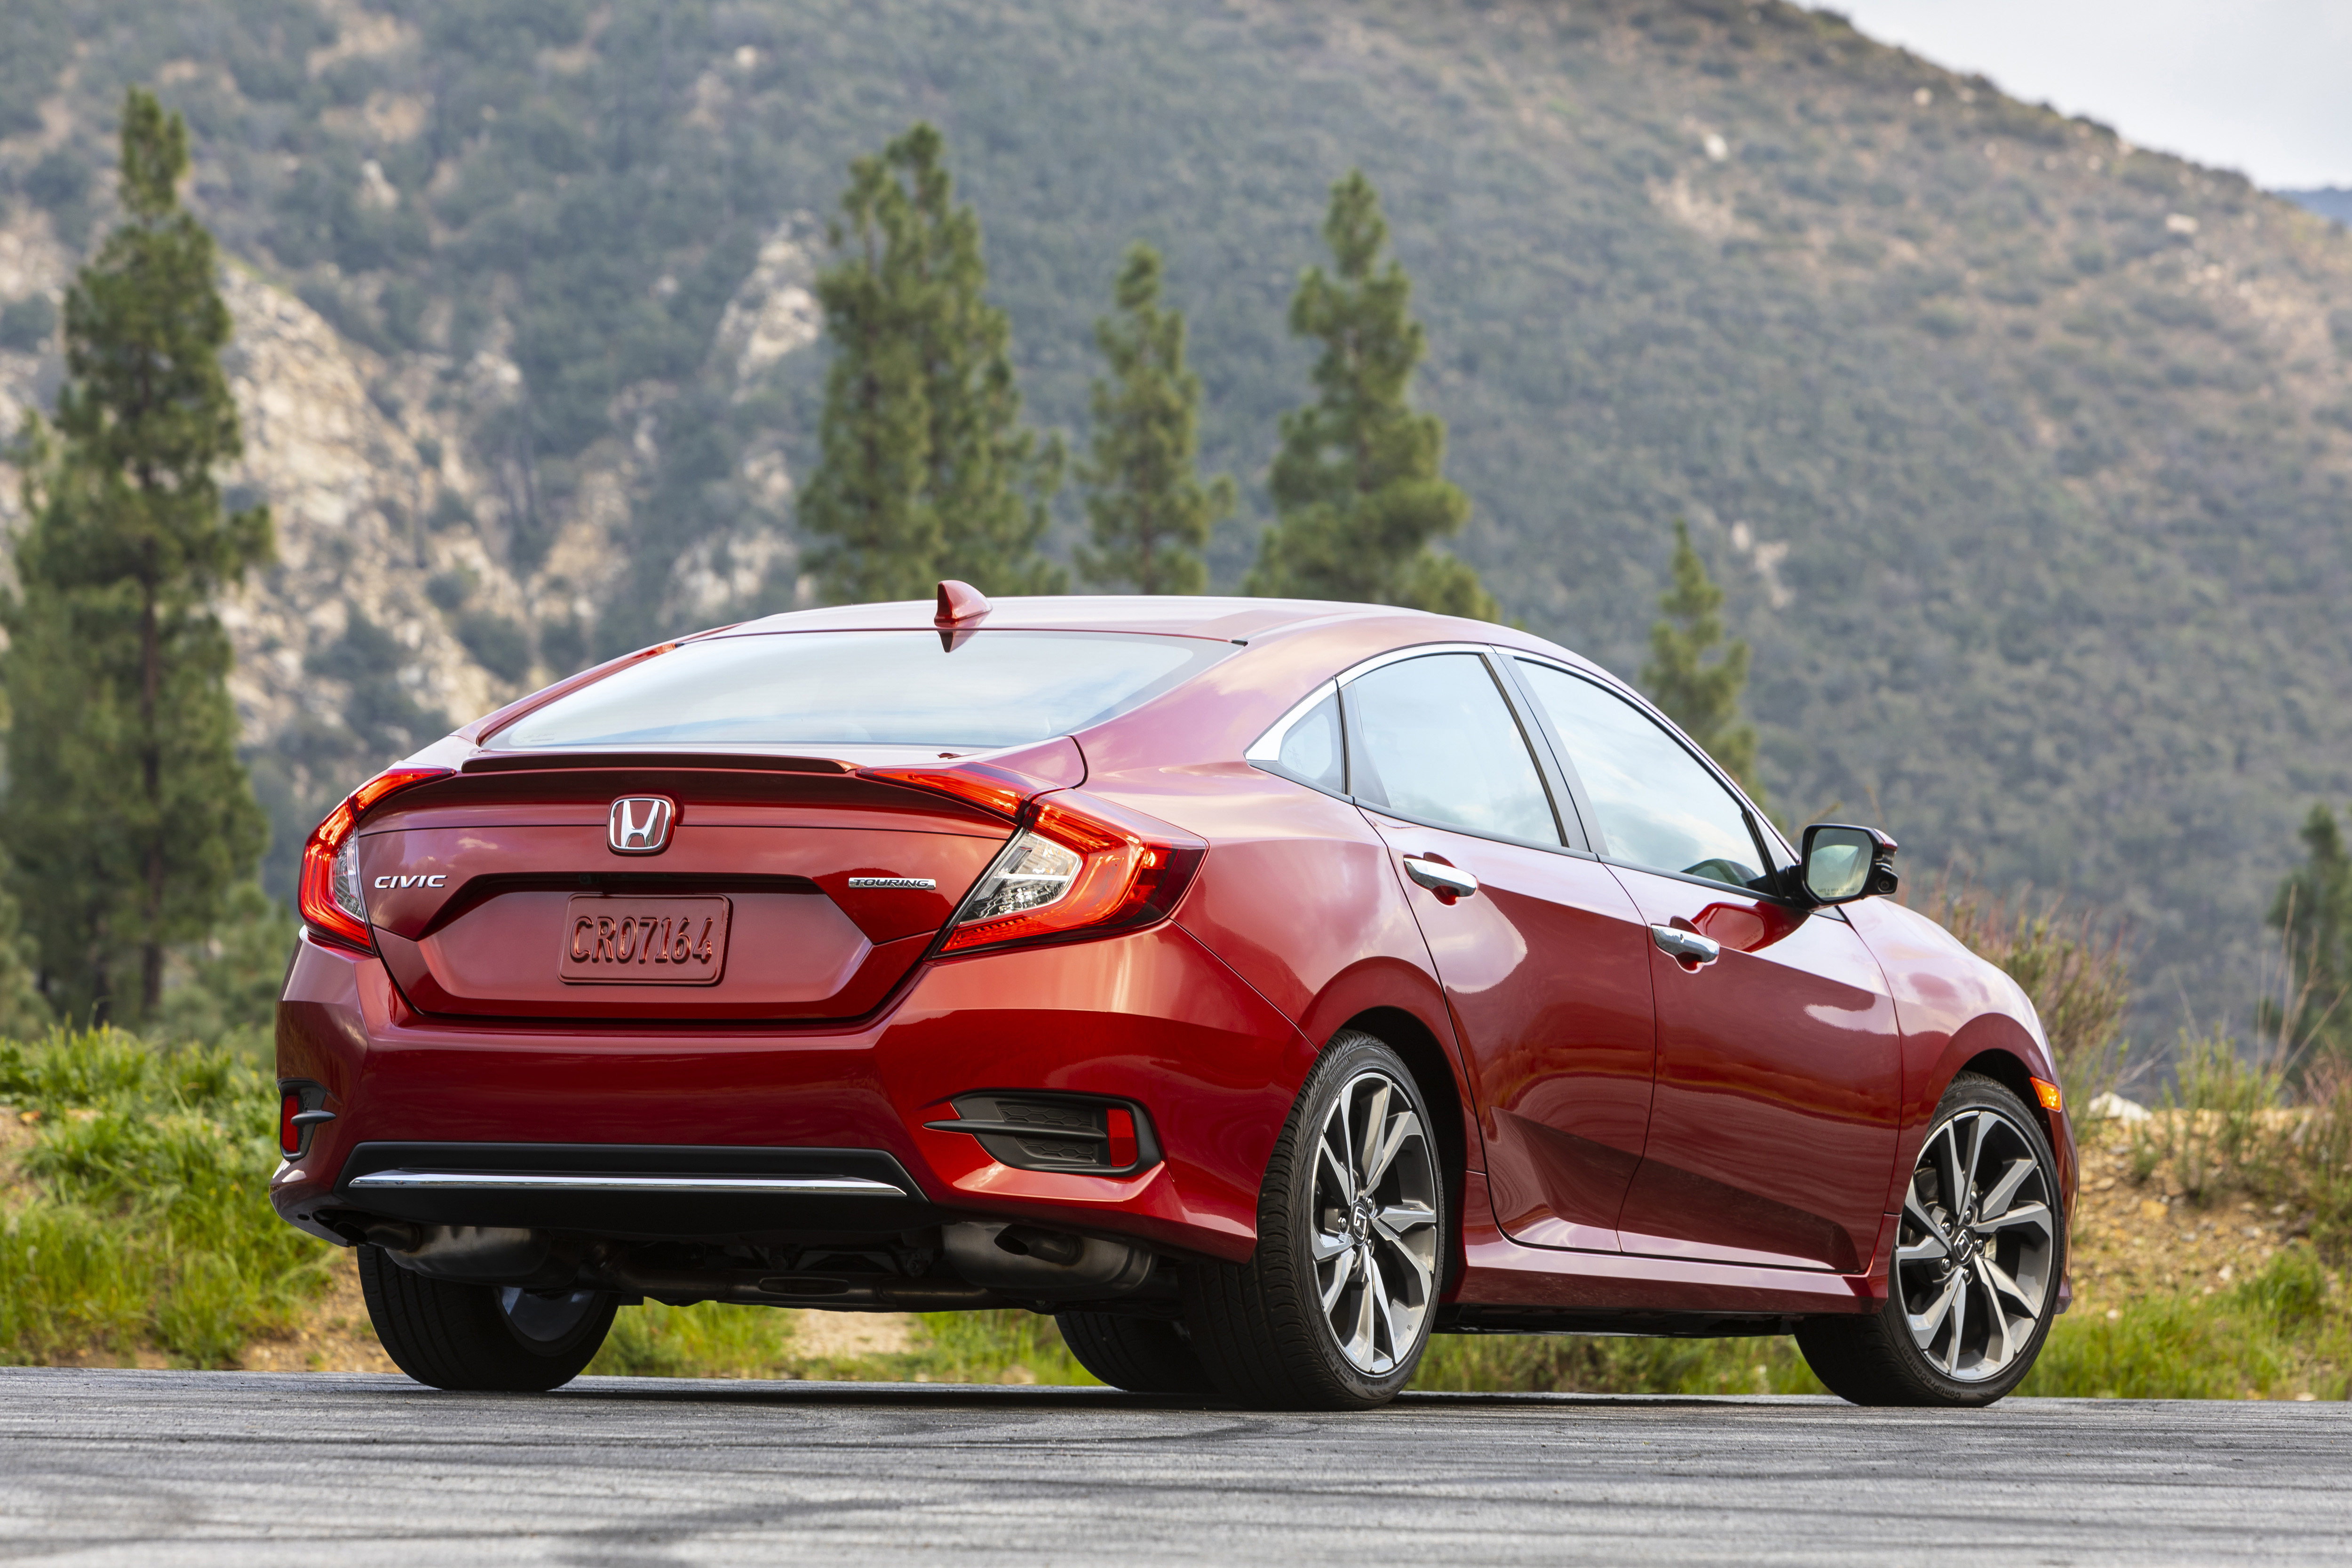 Here's Why the Honda Civic is Still Better Than the